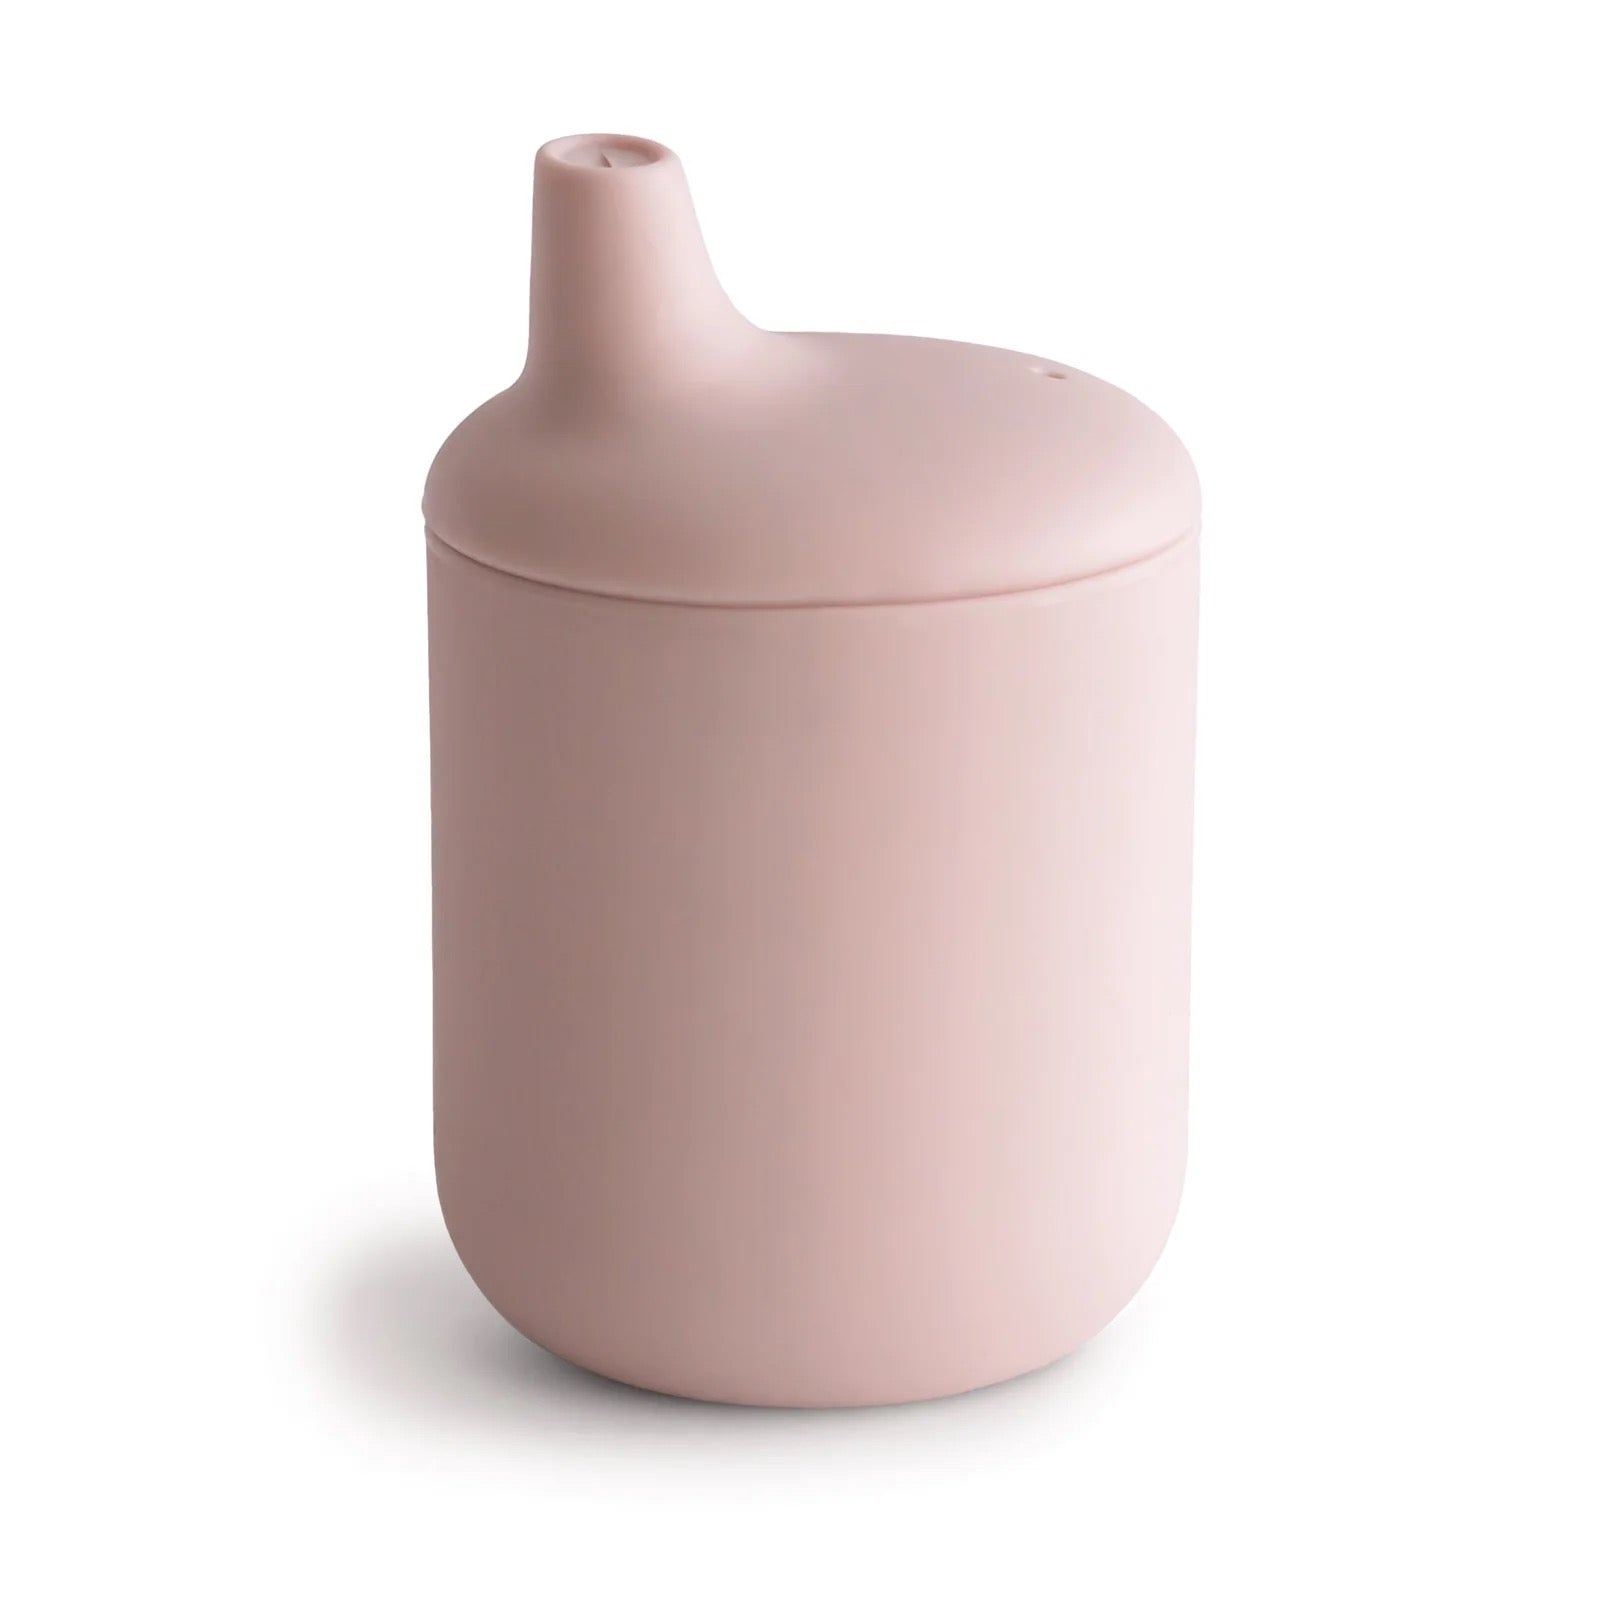 Baby Silicone Sippy Cup